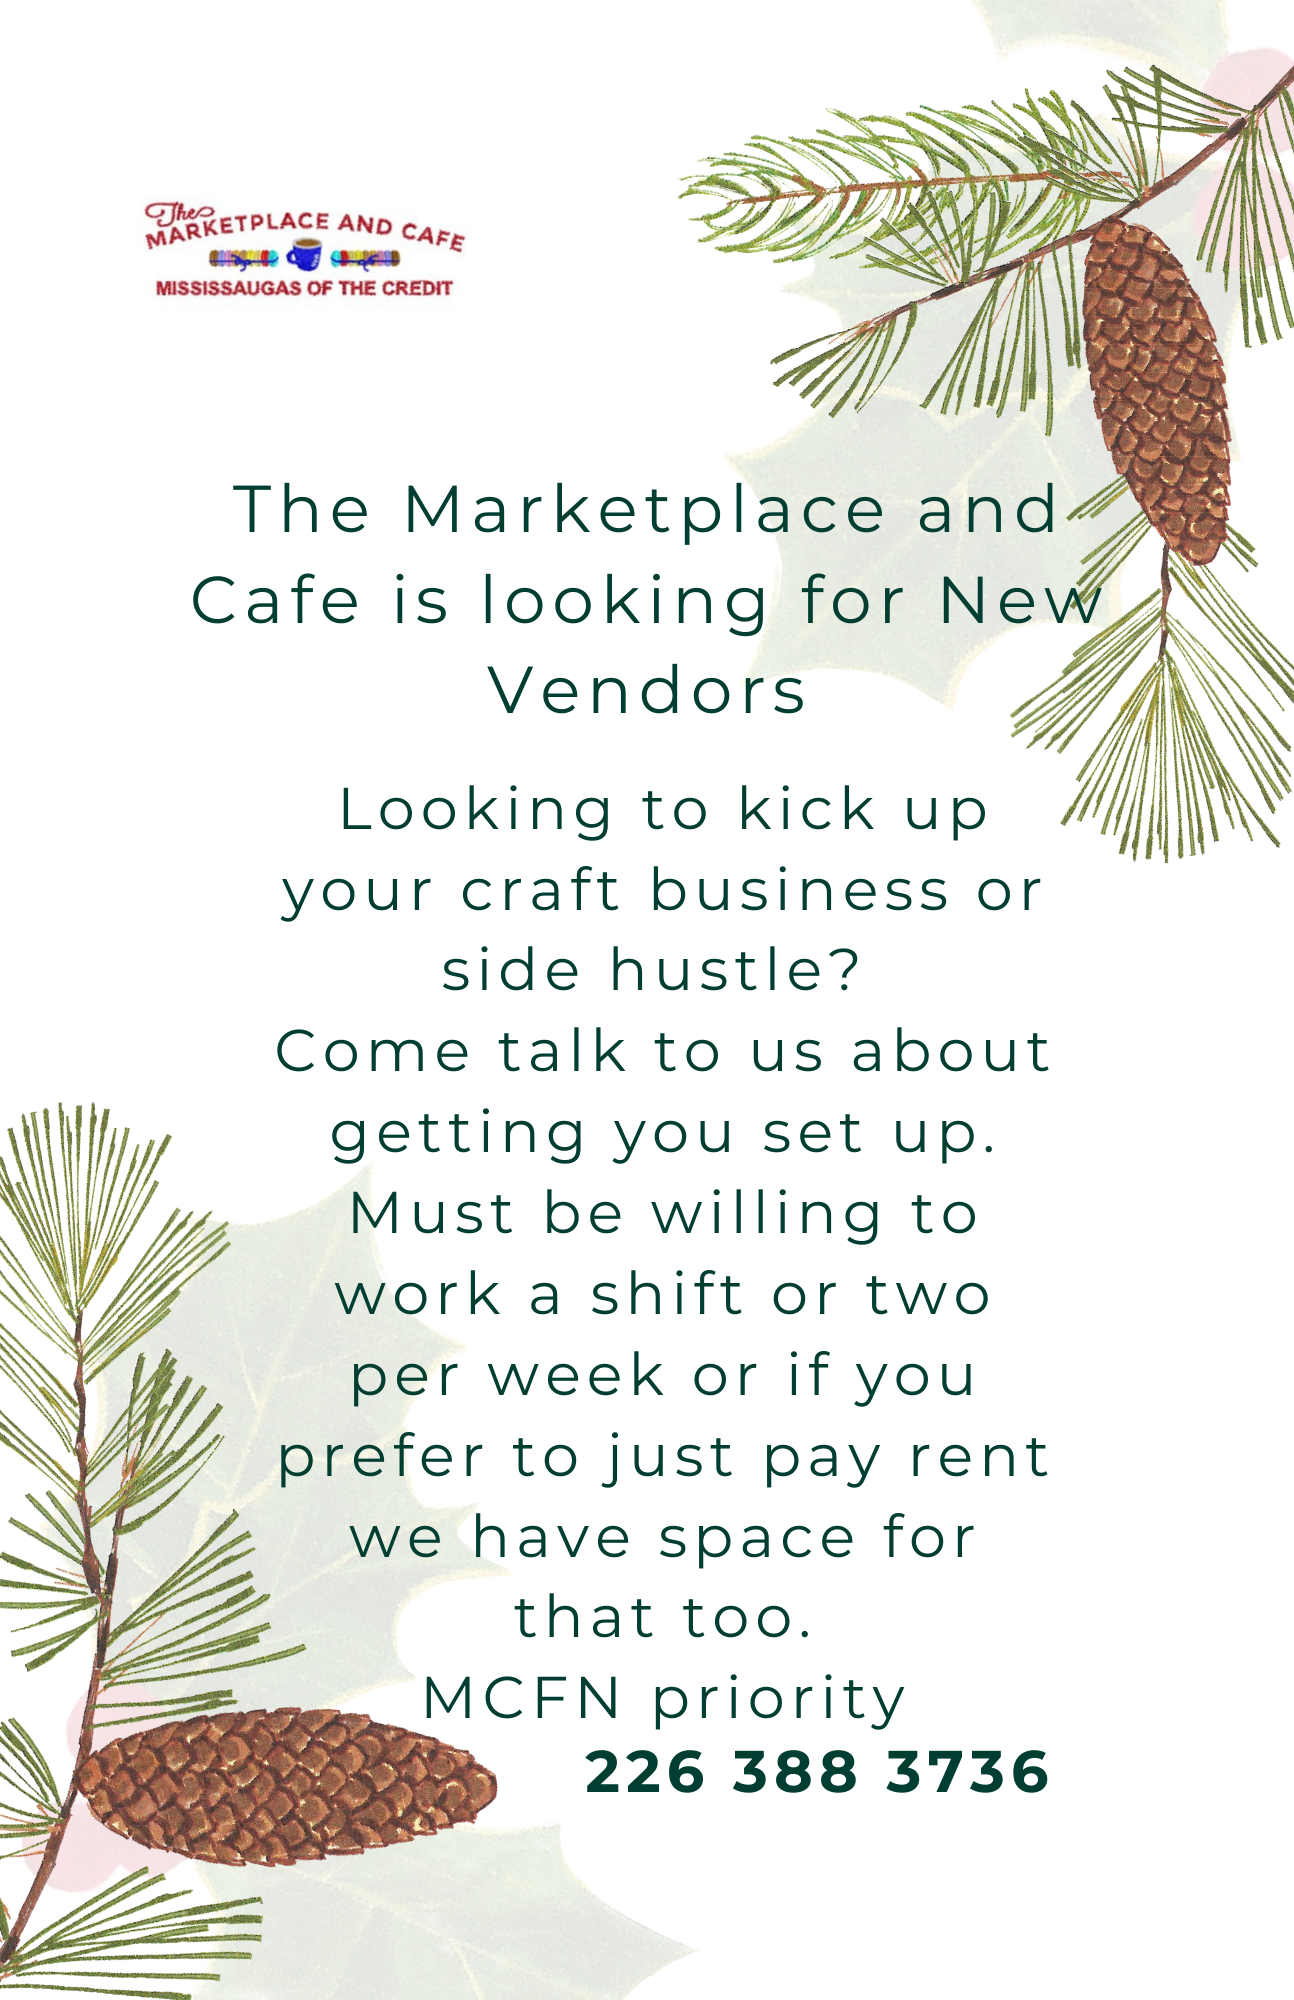 Marketplace and Cafe is looking for vendors